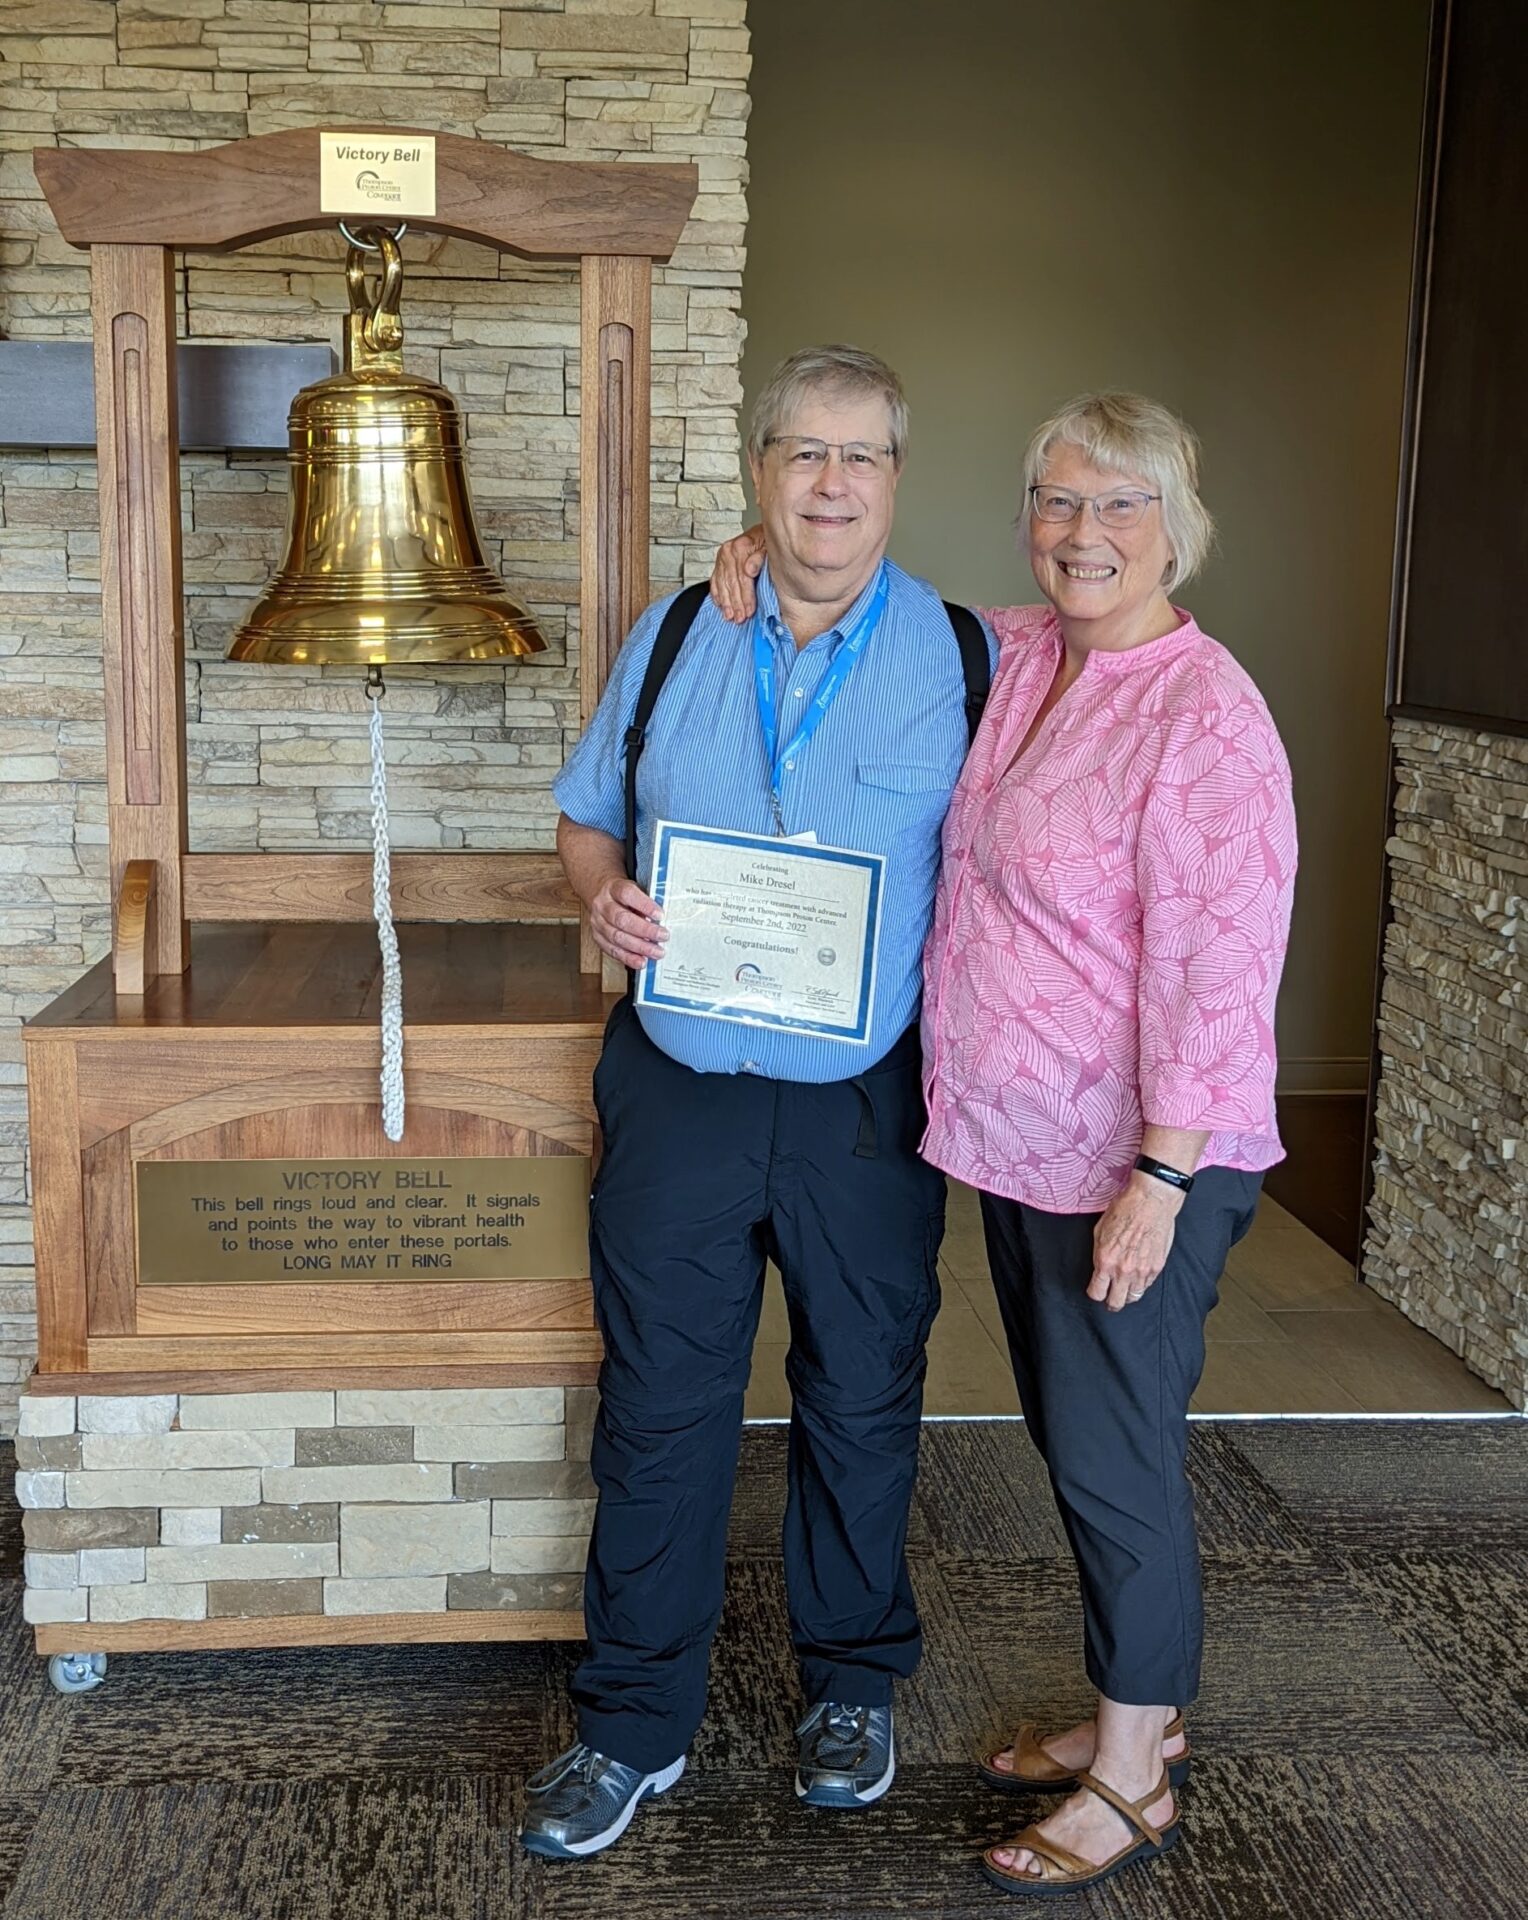 Mike Dresel poses with his wife, Donna, after completing proton therapy treatment at Thompson Proton Center in Knoxville, TN. 